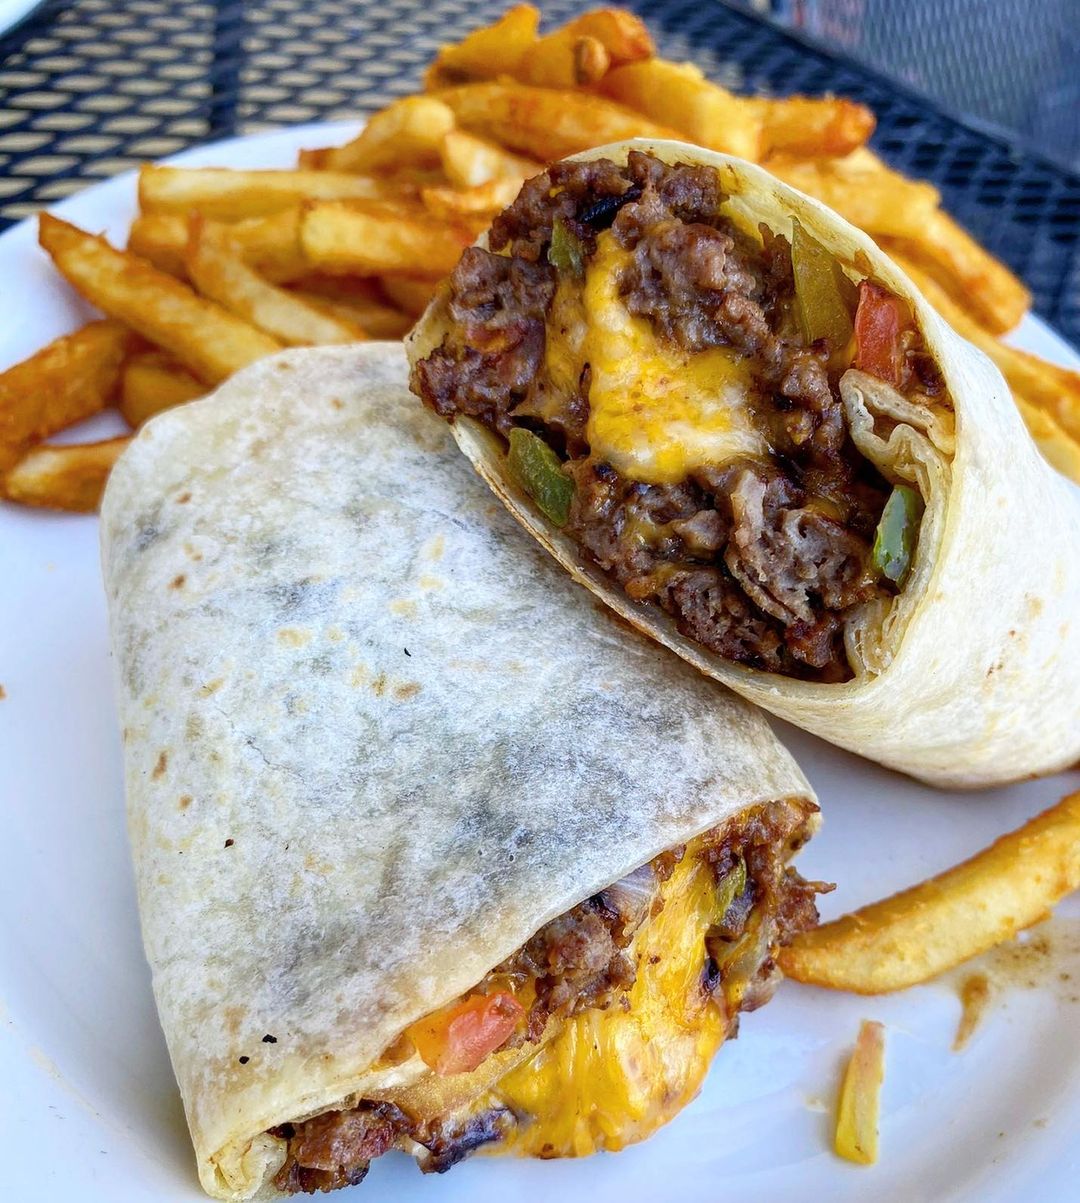 Breakfast burrito and fries. Photo by @griddlecakeslv